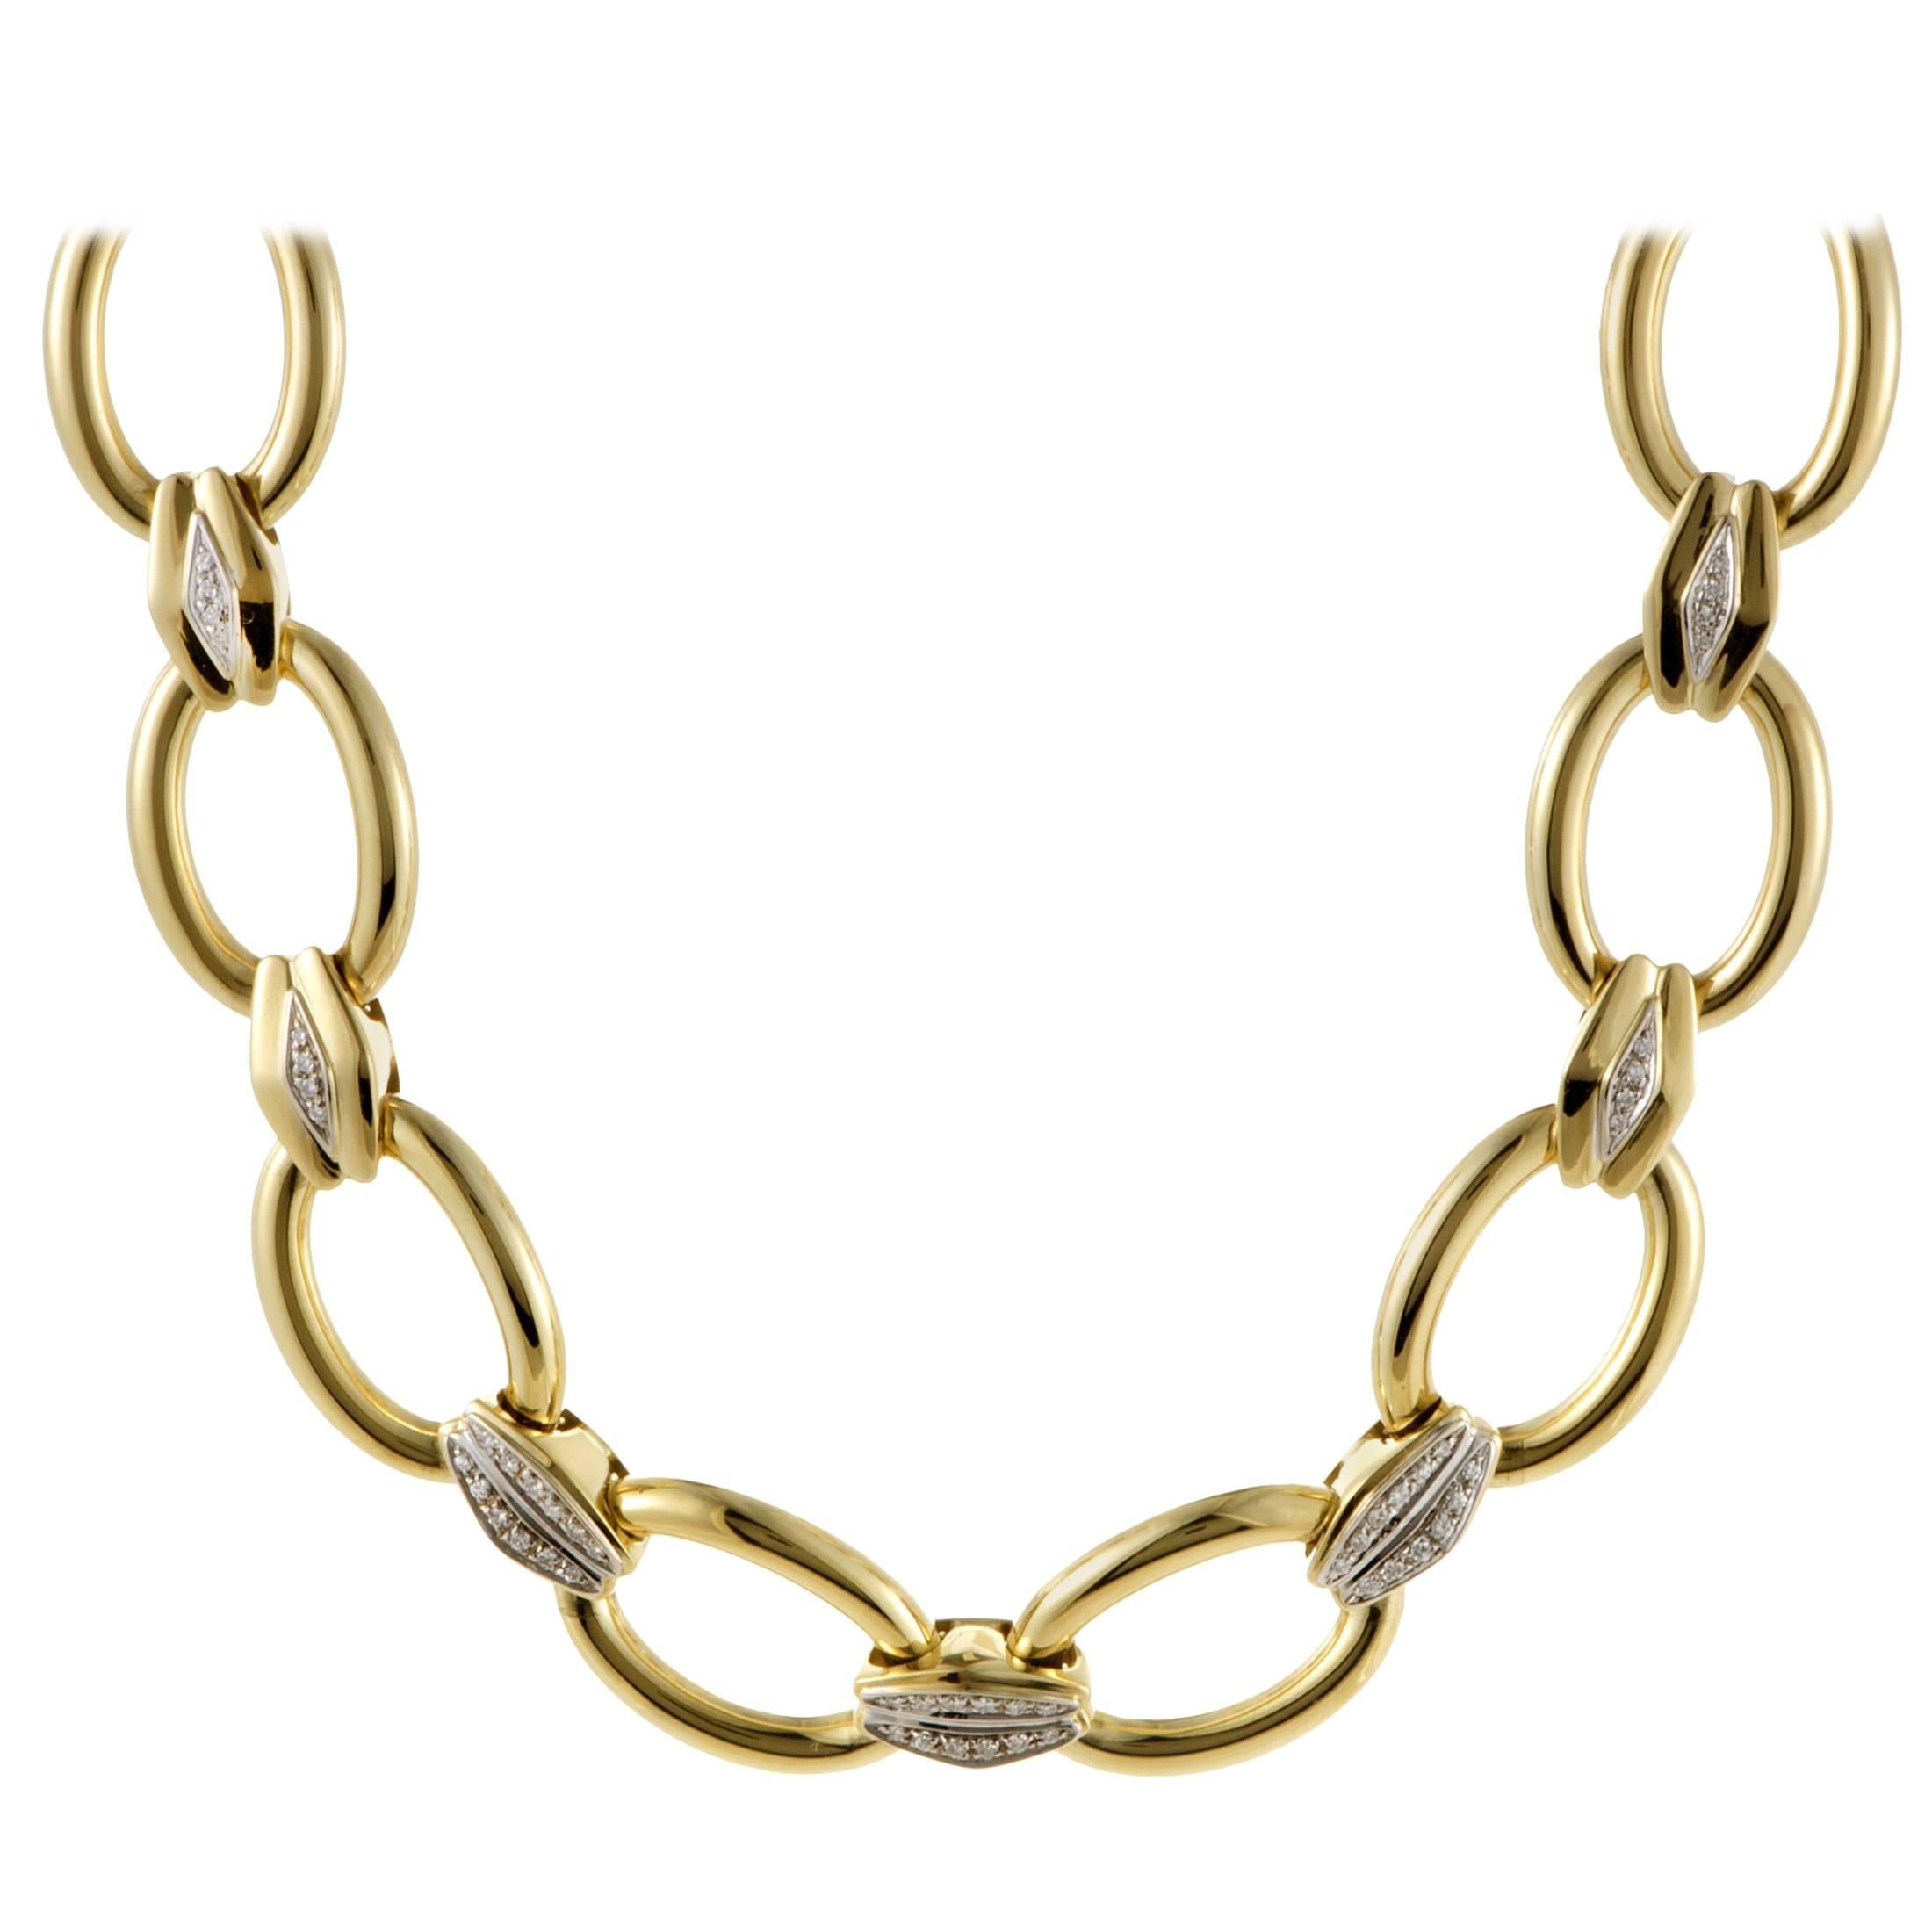 Damiani Diamond Yellow and White Gold Link Collar Necklace